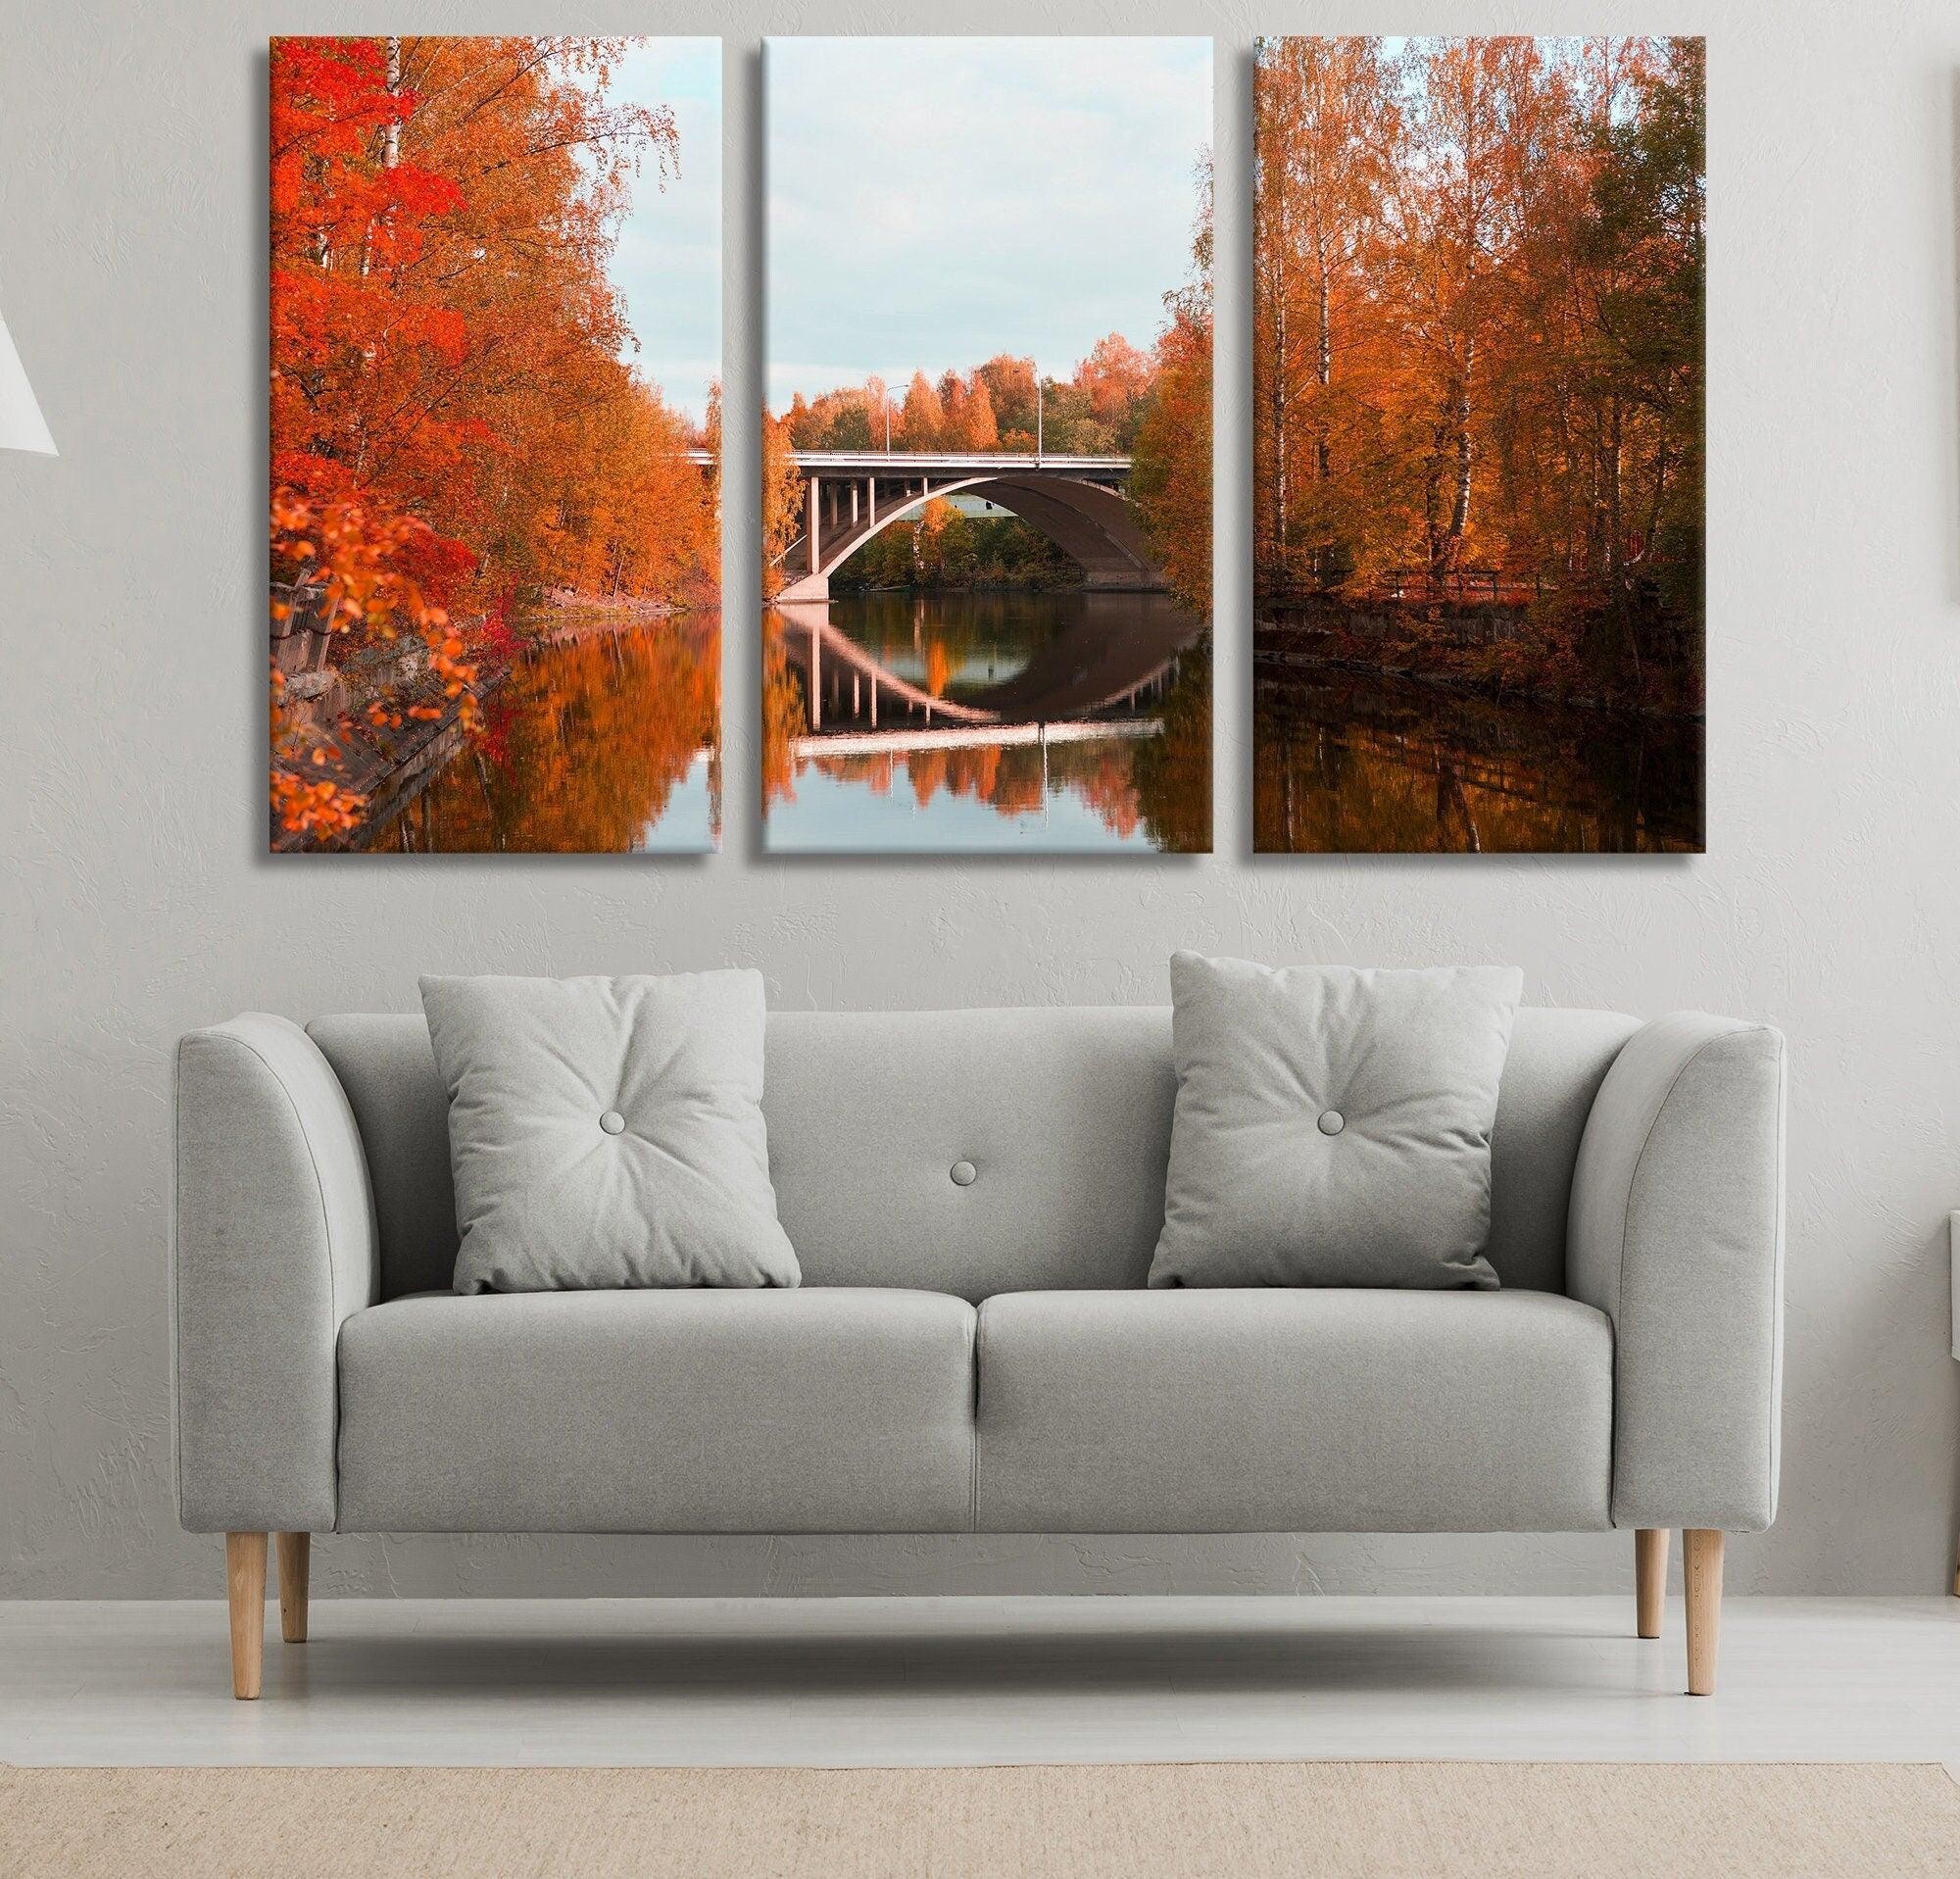 Tree Wall Art Canvas | Gallery Wrapped, 3 piece canvas wall art, canvas wall art, extra large canvas wall art, Autumn Forest Trees